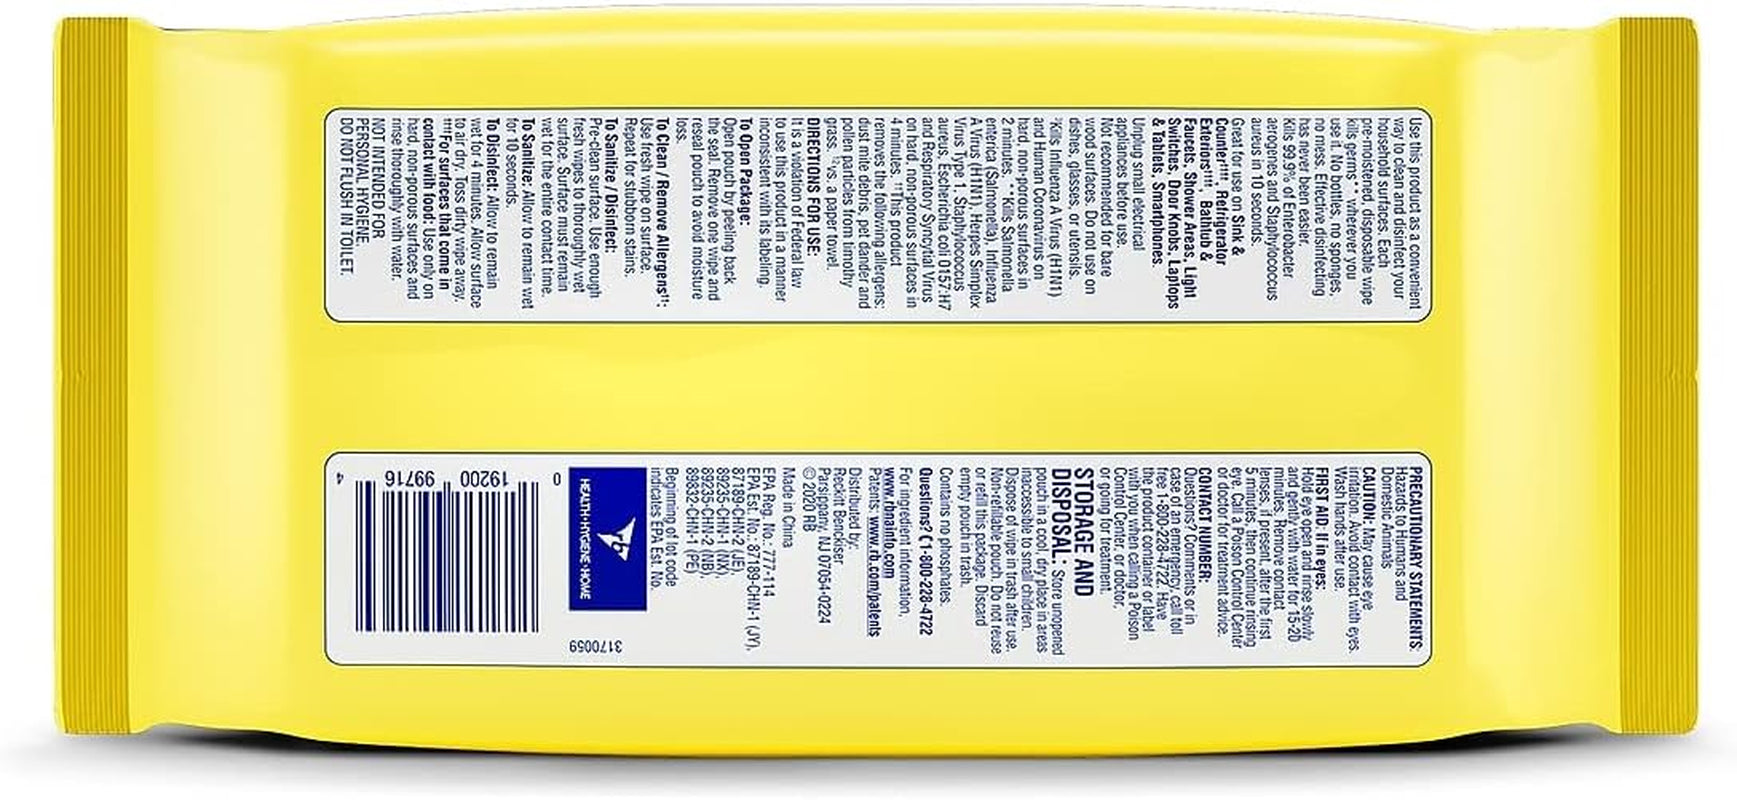 Disinfectant Handi-Pack Wipes, Multi-Surface Antibacterial Cleaning Wipes, for Disinfecting and Cleaning, Lemon and Lime Blossom, 480 Count (Pack of 6)